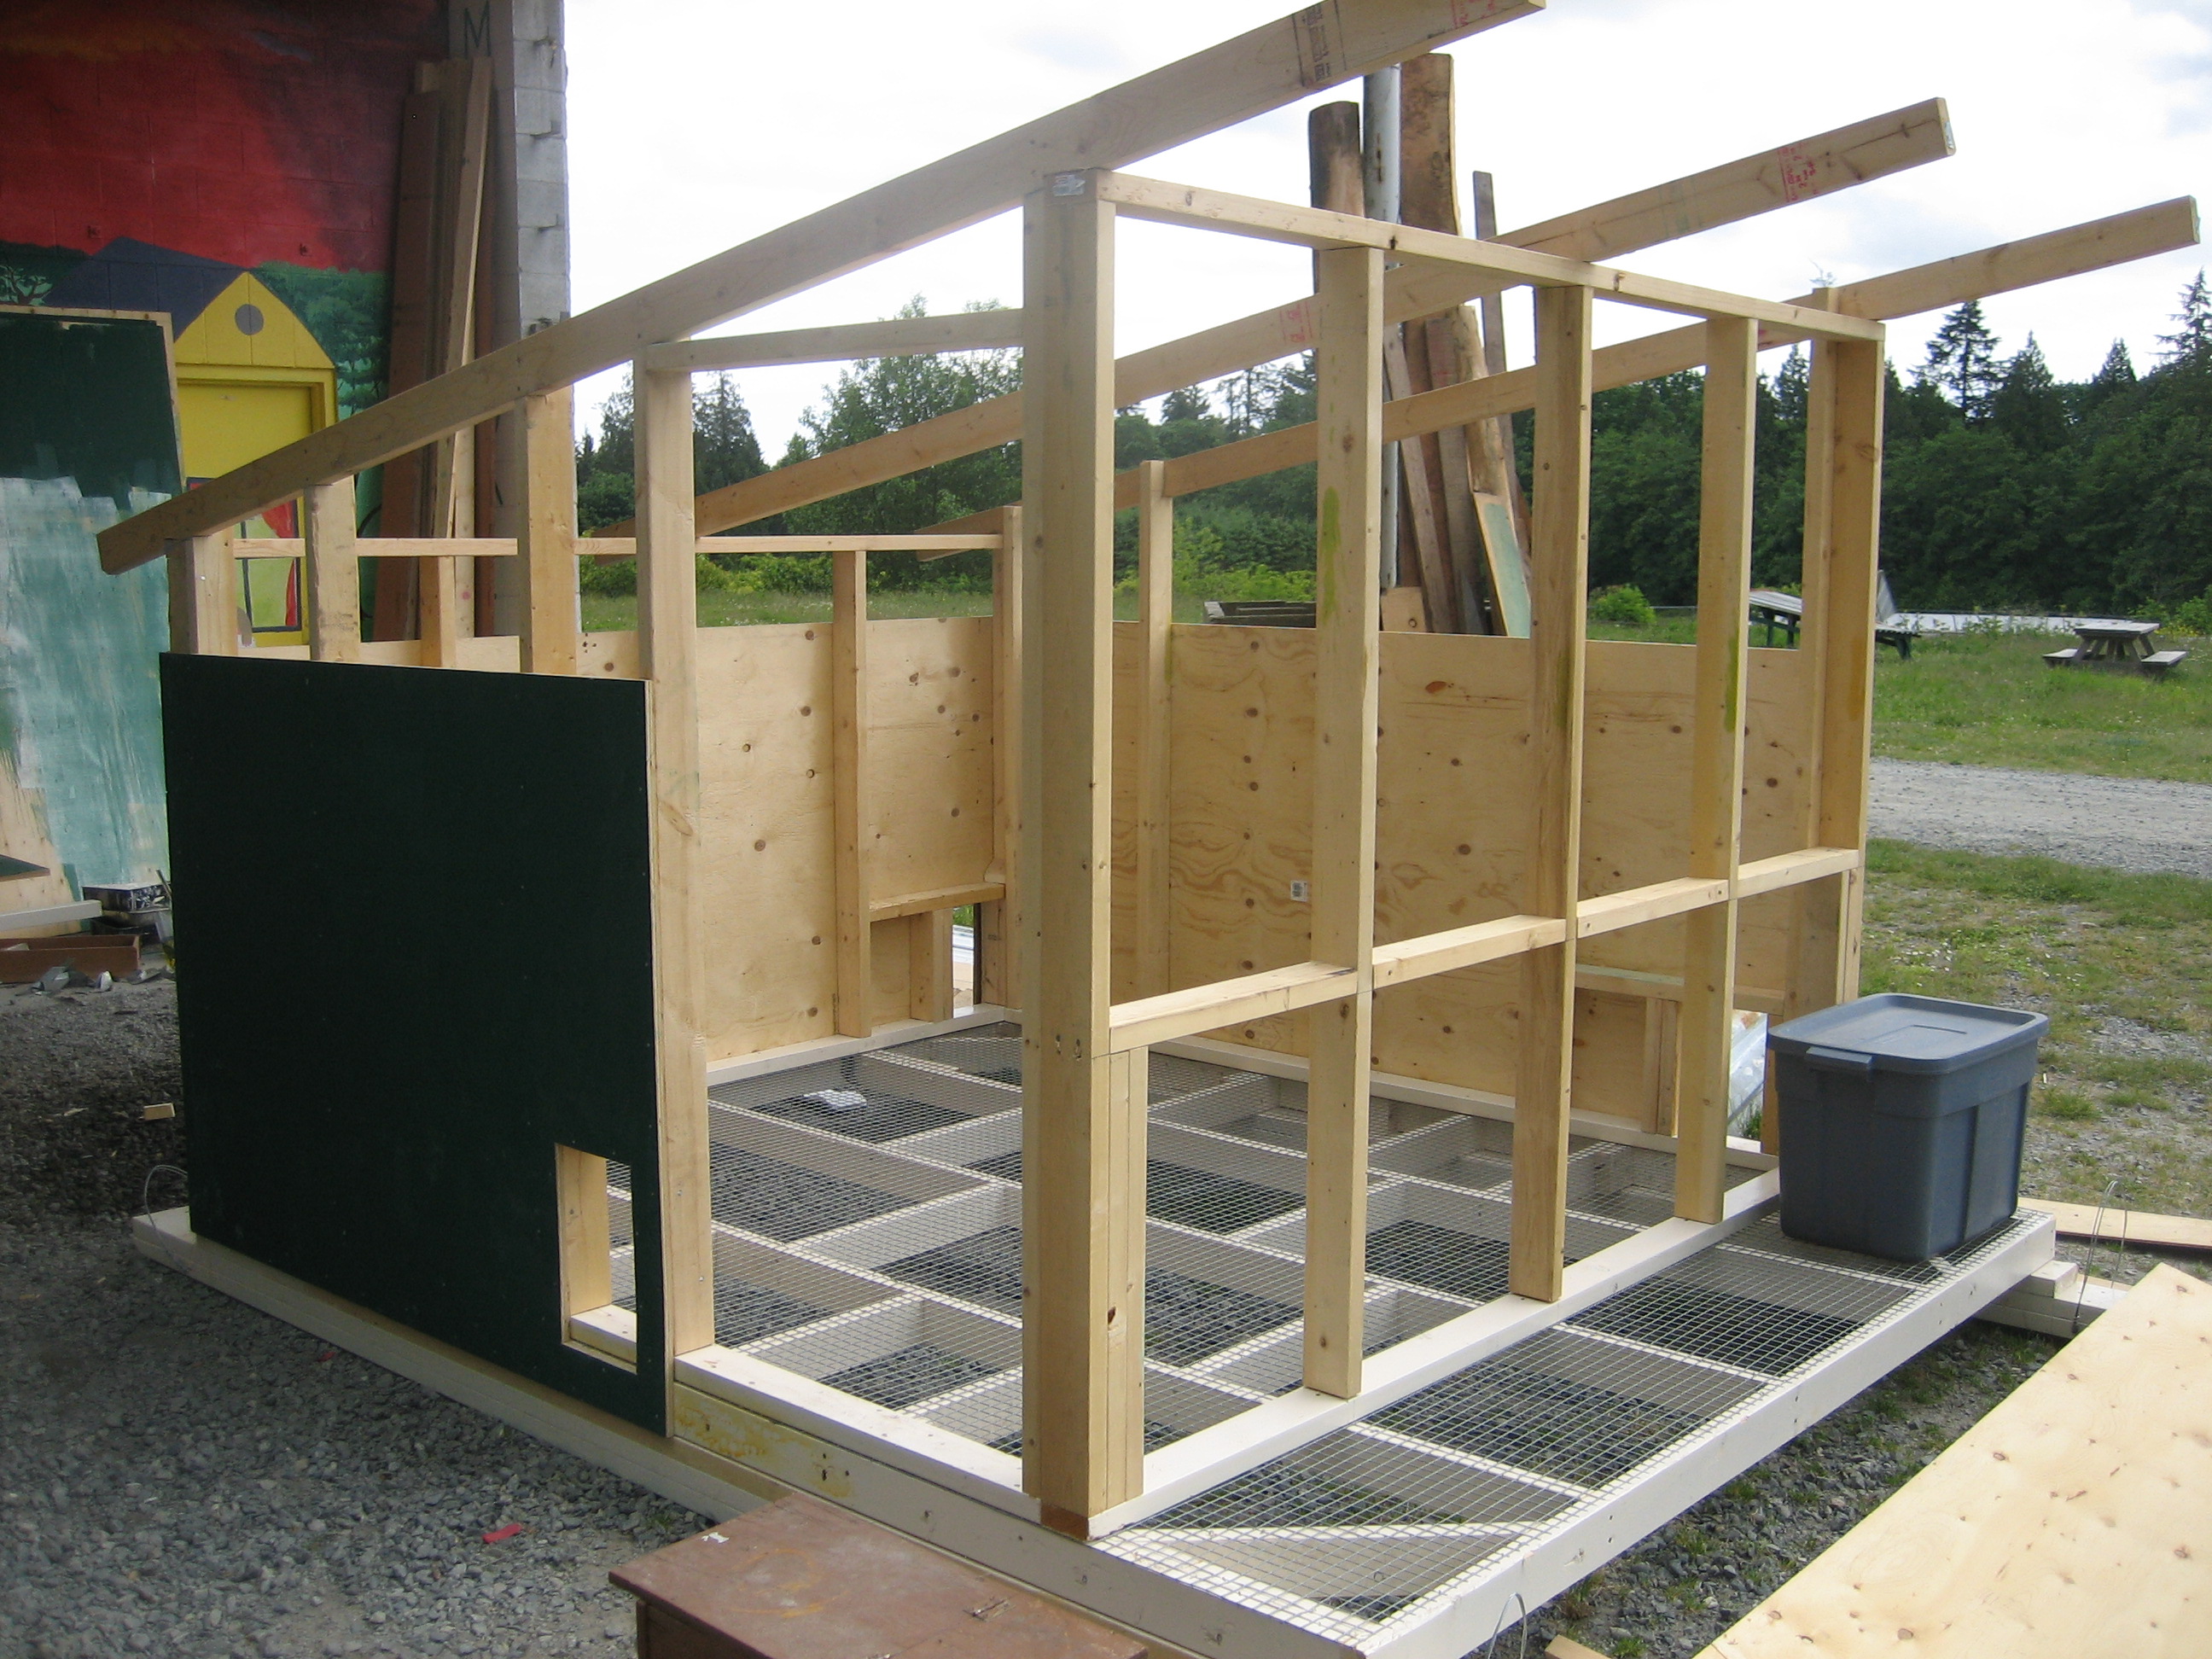 Construction plans for a Chicken Coop | New and Clever Patterns for 